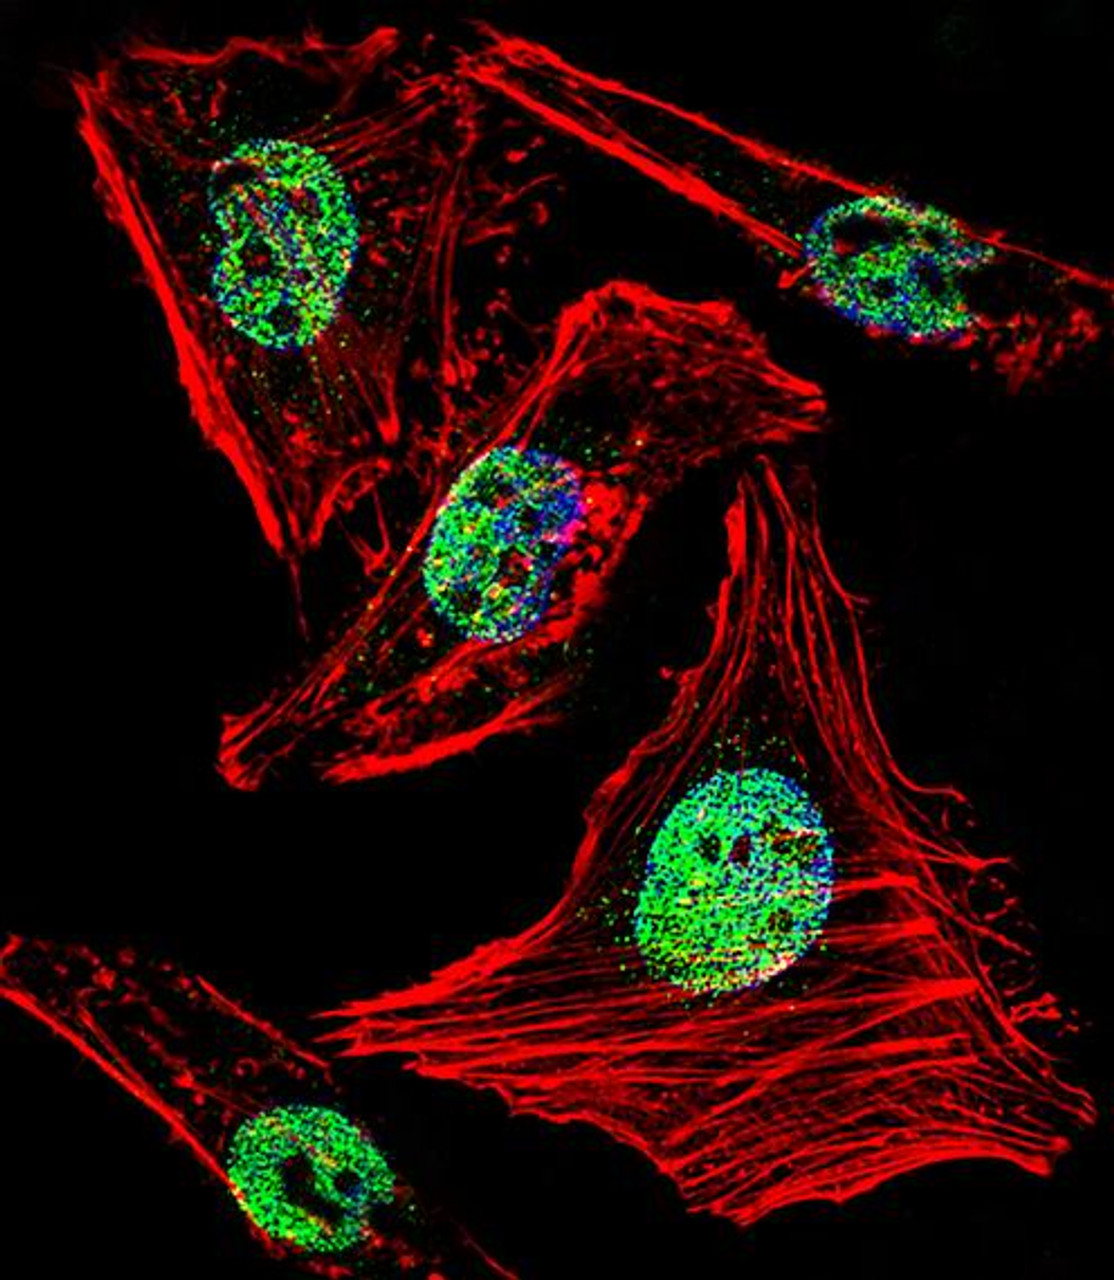 Fluorescent confocal image of Hela cell stained with ZBTB7B Antibody .Hela cells were fixed with 4% PFA (20 min) , permeabilized with Triton X-100 (0.1%, 10 min) , then incubated with ZBTB7B primary antibody (1:25) . For secondary antibody, Alexa Fluor 488 conjugated donkey anti-rabbit antibody (green) was used (1:400) .Cytoplasmic actin was counterstained with Alexa Fluor 555 (red) conjugated Phalloidin (7units/ml) . Nuclei were counterstained with DAPI (blue) (10 ug/ml, 10 min) . ZBTB7B immunoreactivity is localized to Nucleus significantly.